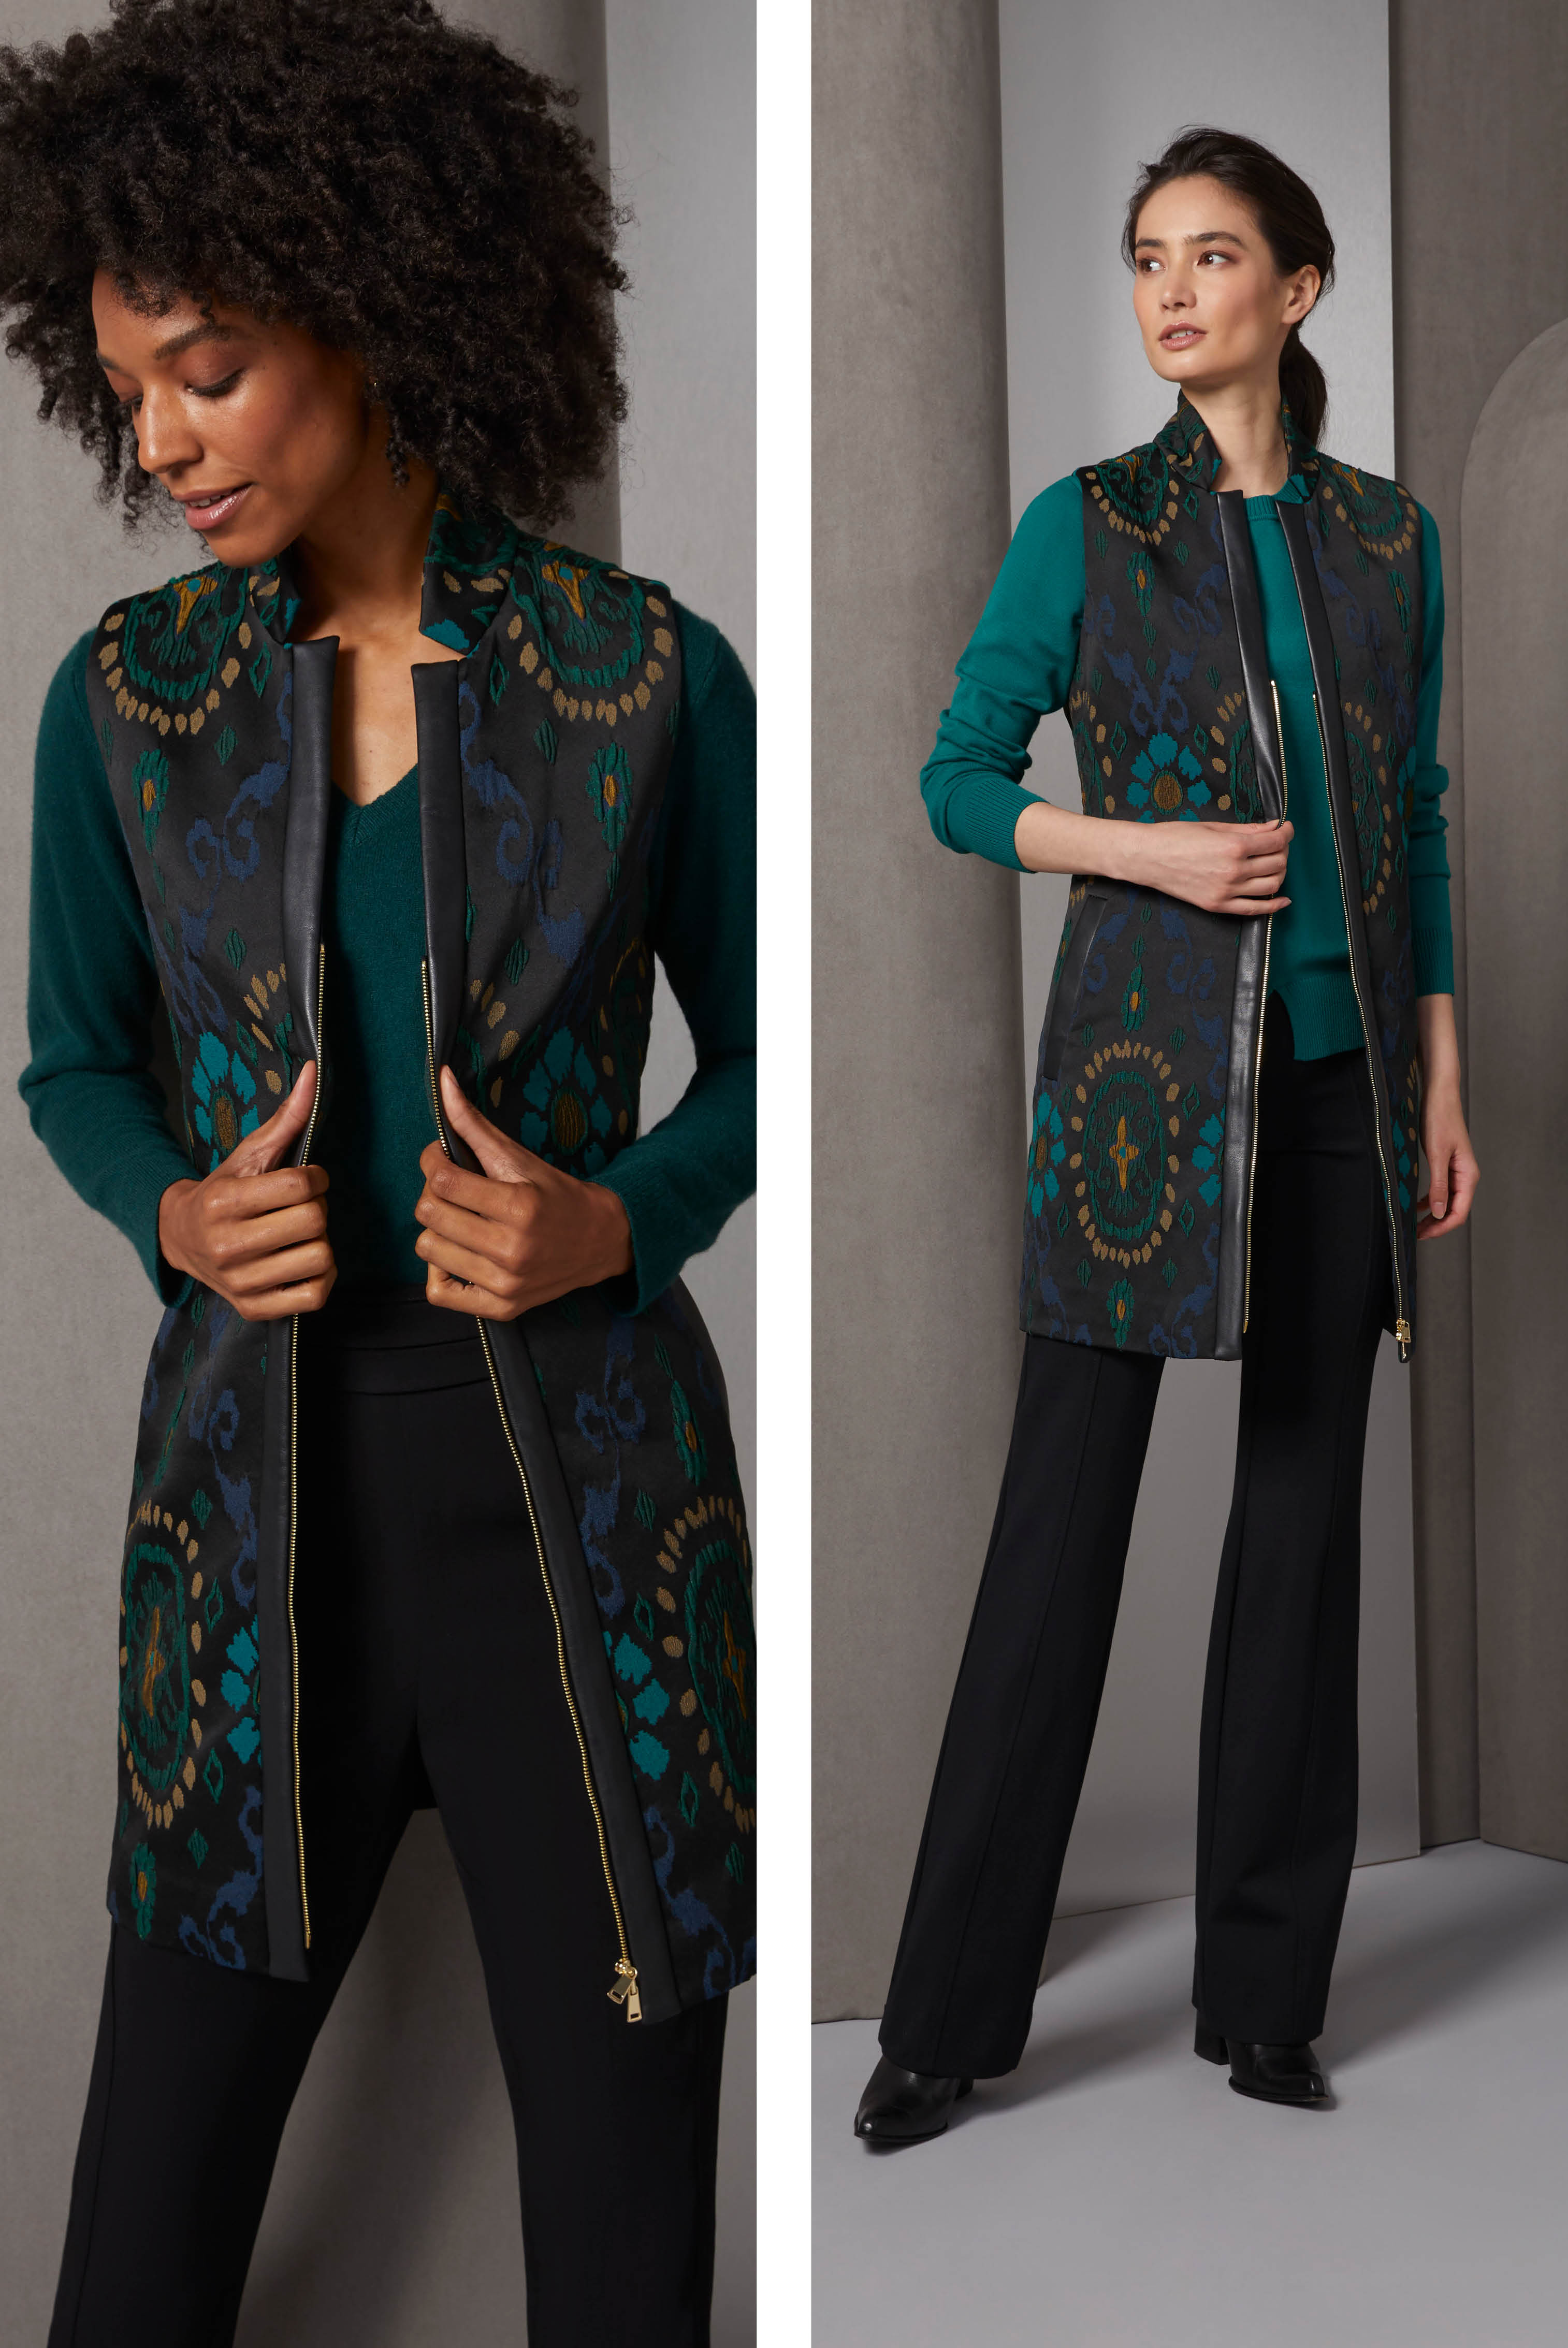 This posh Italian jacquard vest has an abstract floral pattern that resembles a priceless Turkish rug. The spruce green in the pattern is echoed by the feminine, all-cashmere V-neck sweater. 